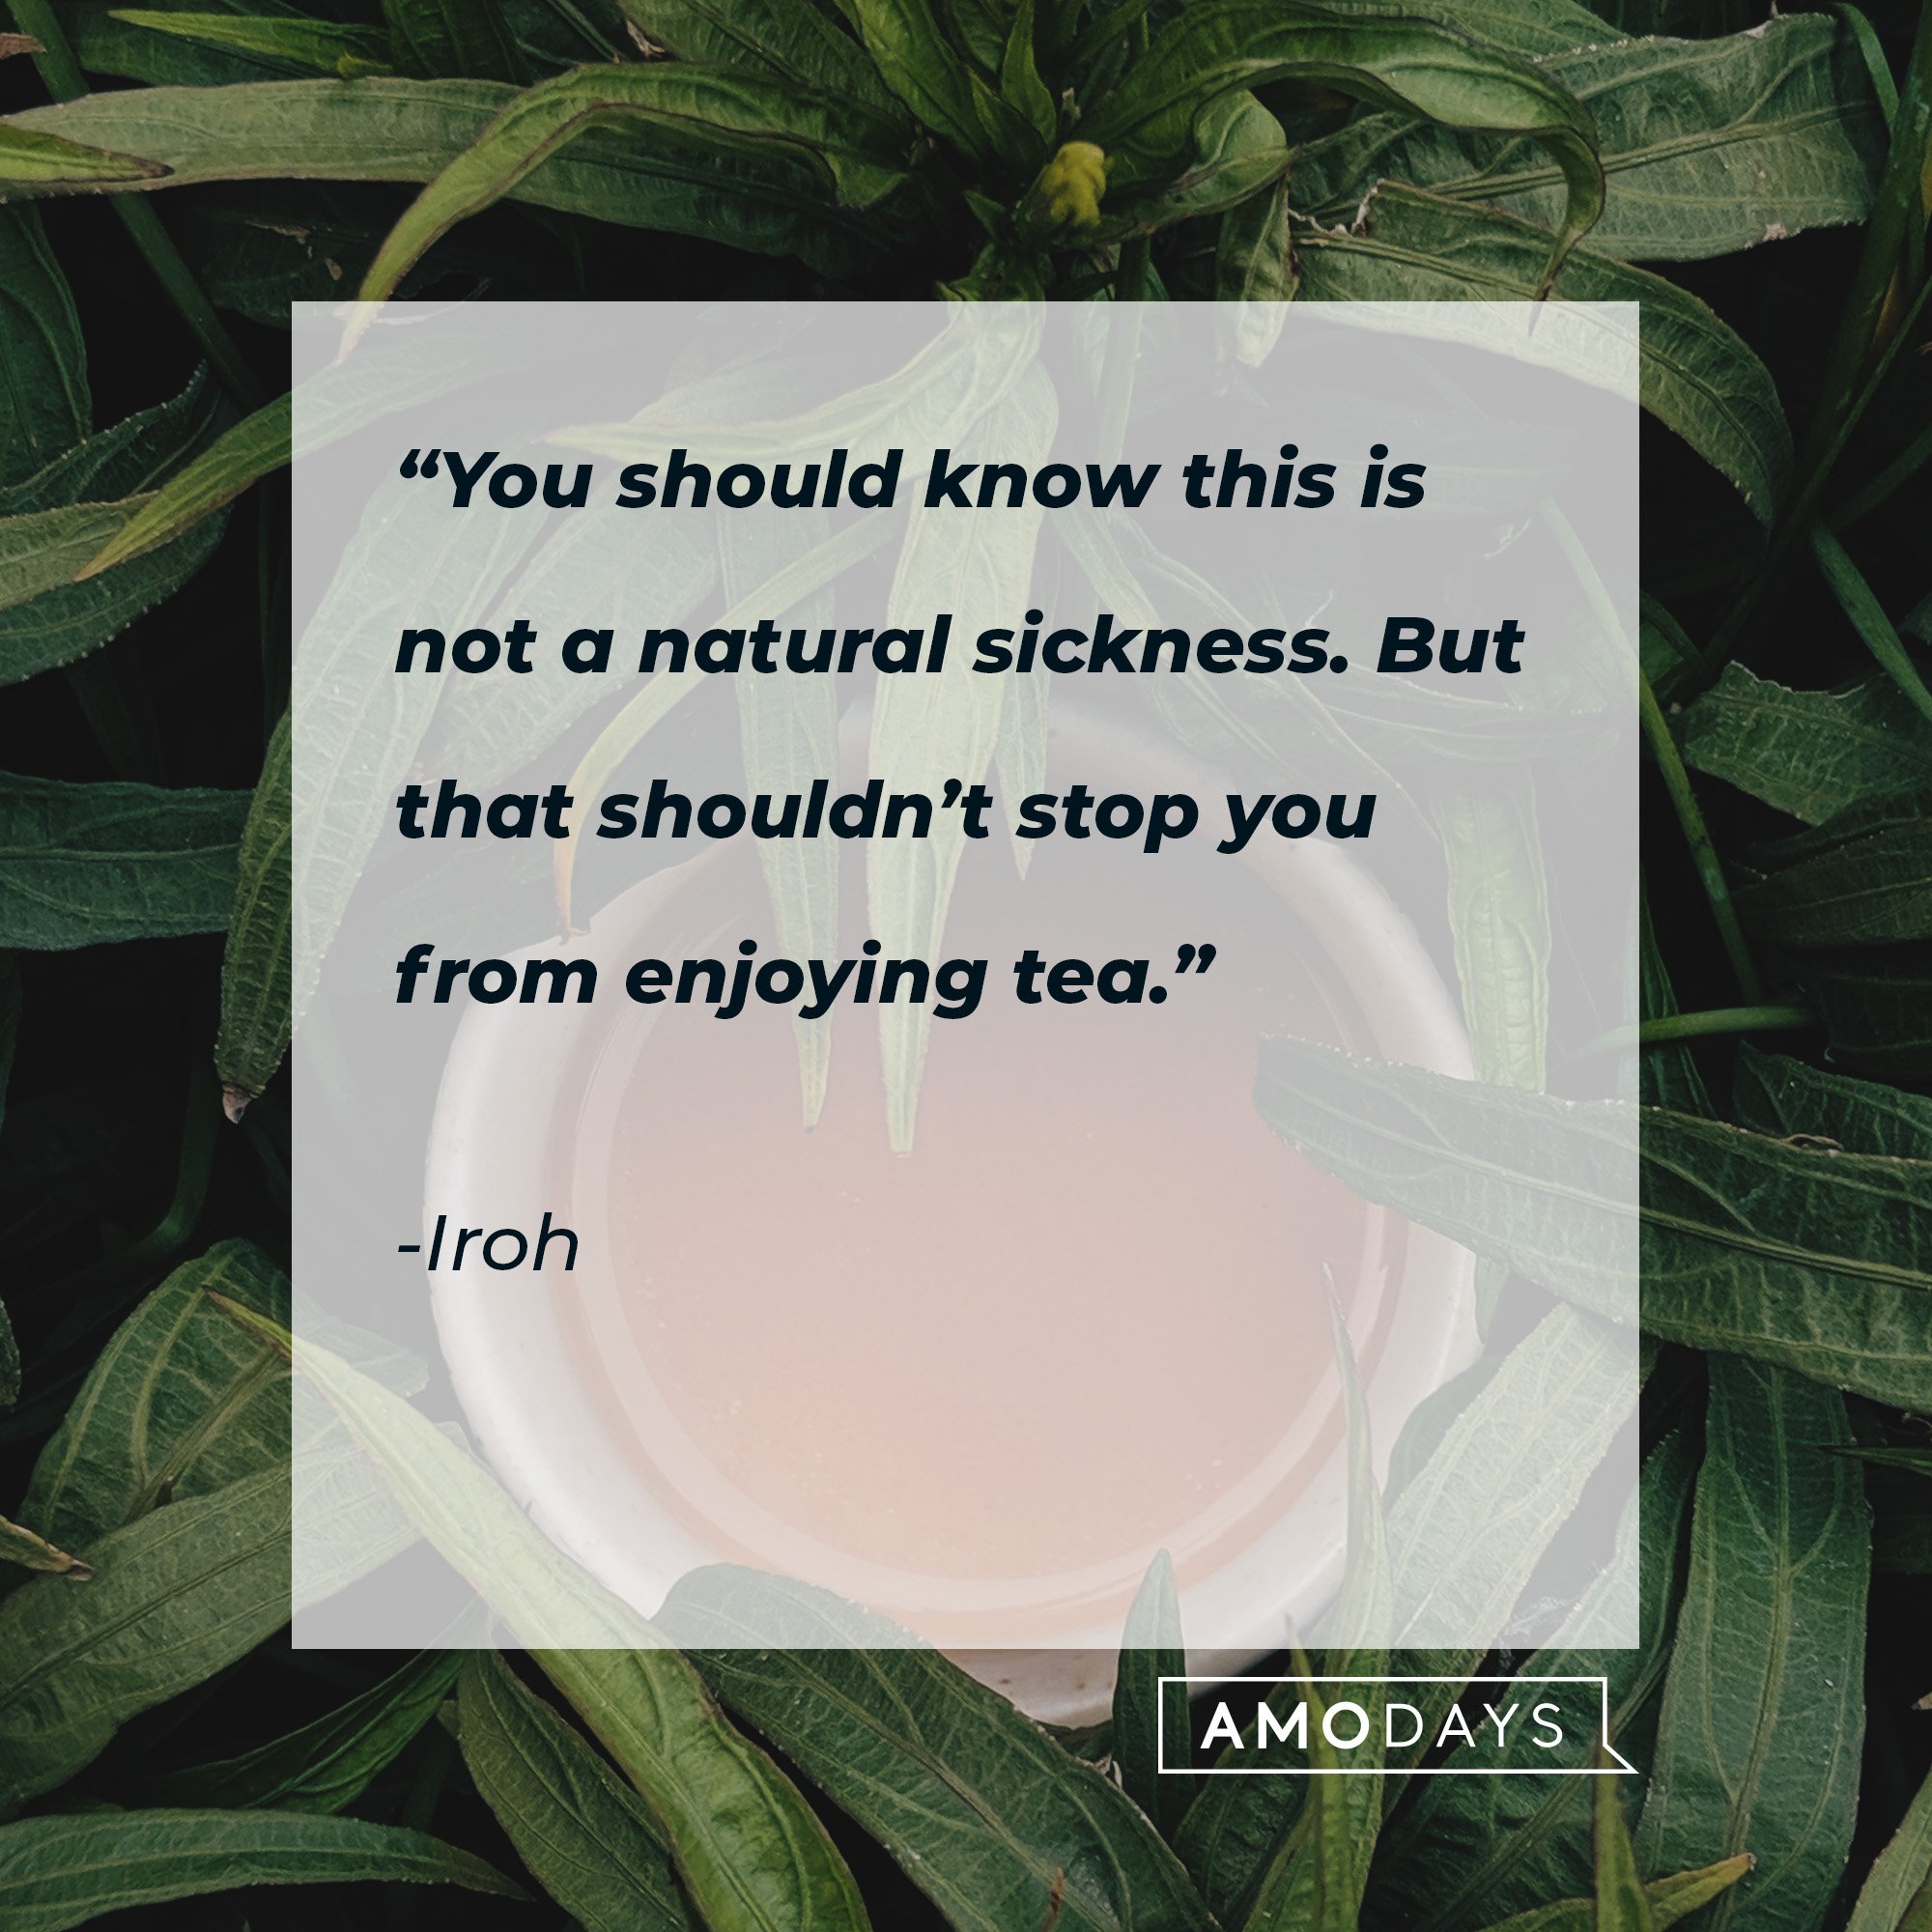 Iroh's quote: “You should know this is not a natural sickness. But that shouldn’t stop you from enjoying tea.” | Image: AmoDays